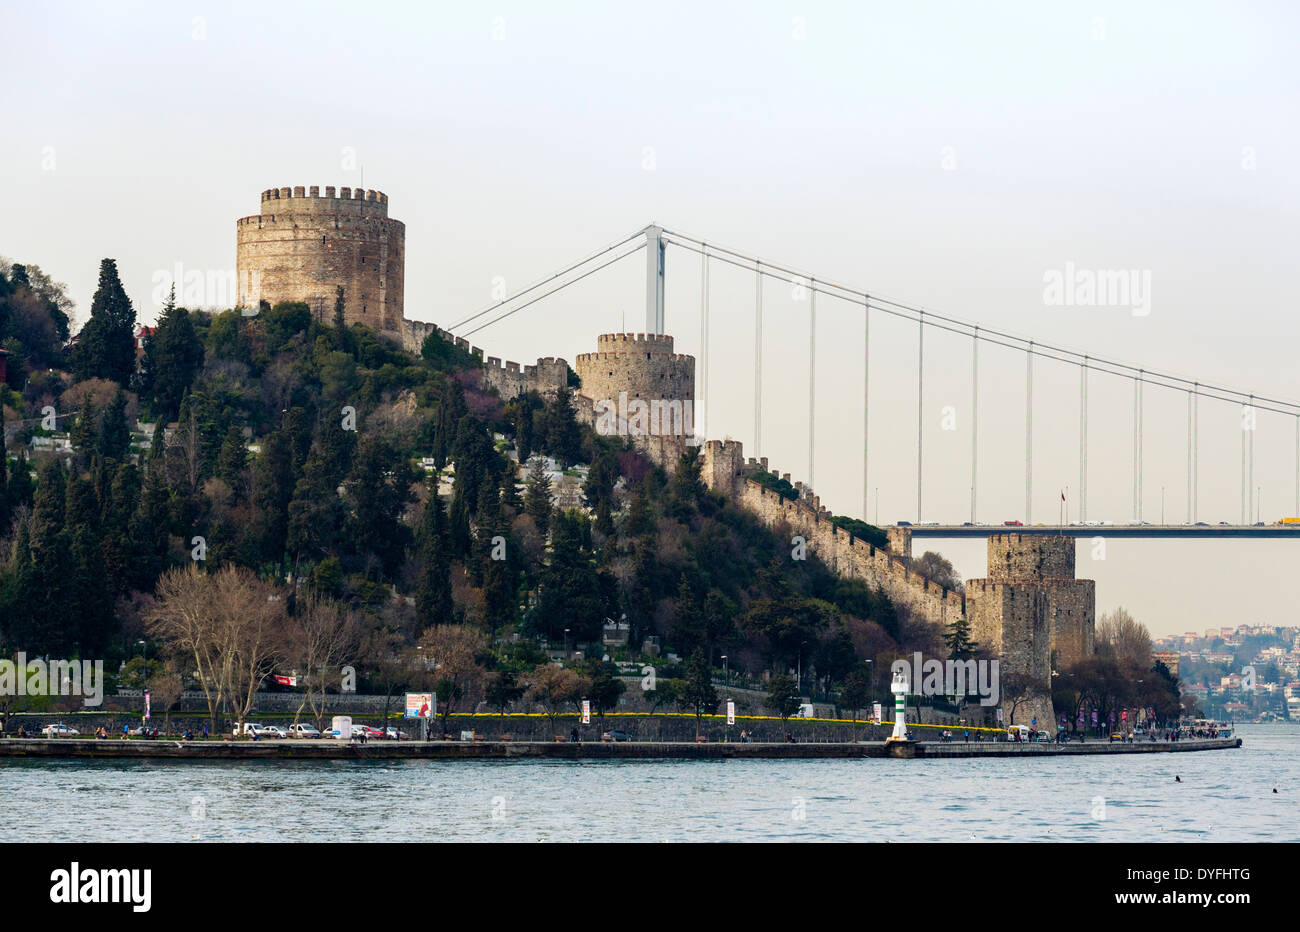 The Fortress of Rumeli Hisari and Fatih Sultan Mehmet bridge, taken from the deck of a Bosphorus cruise boat, Istanbul, Turkey Stock Photo